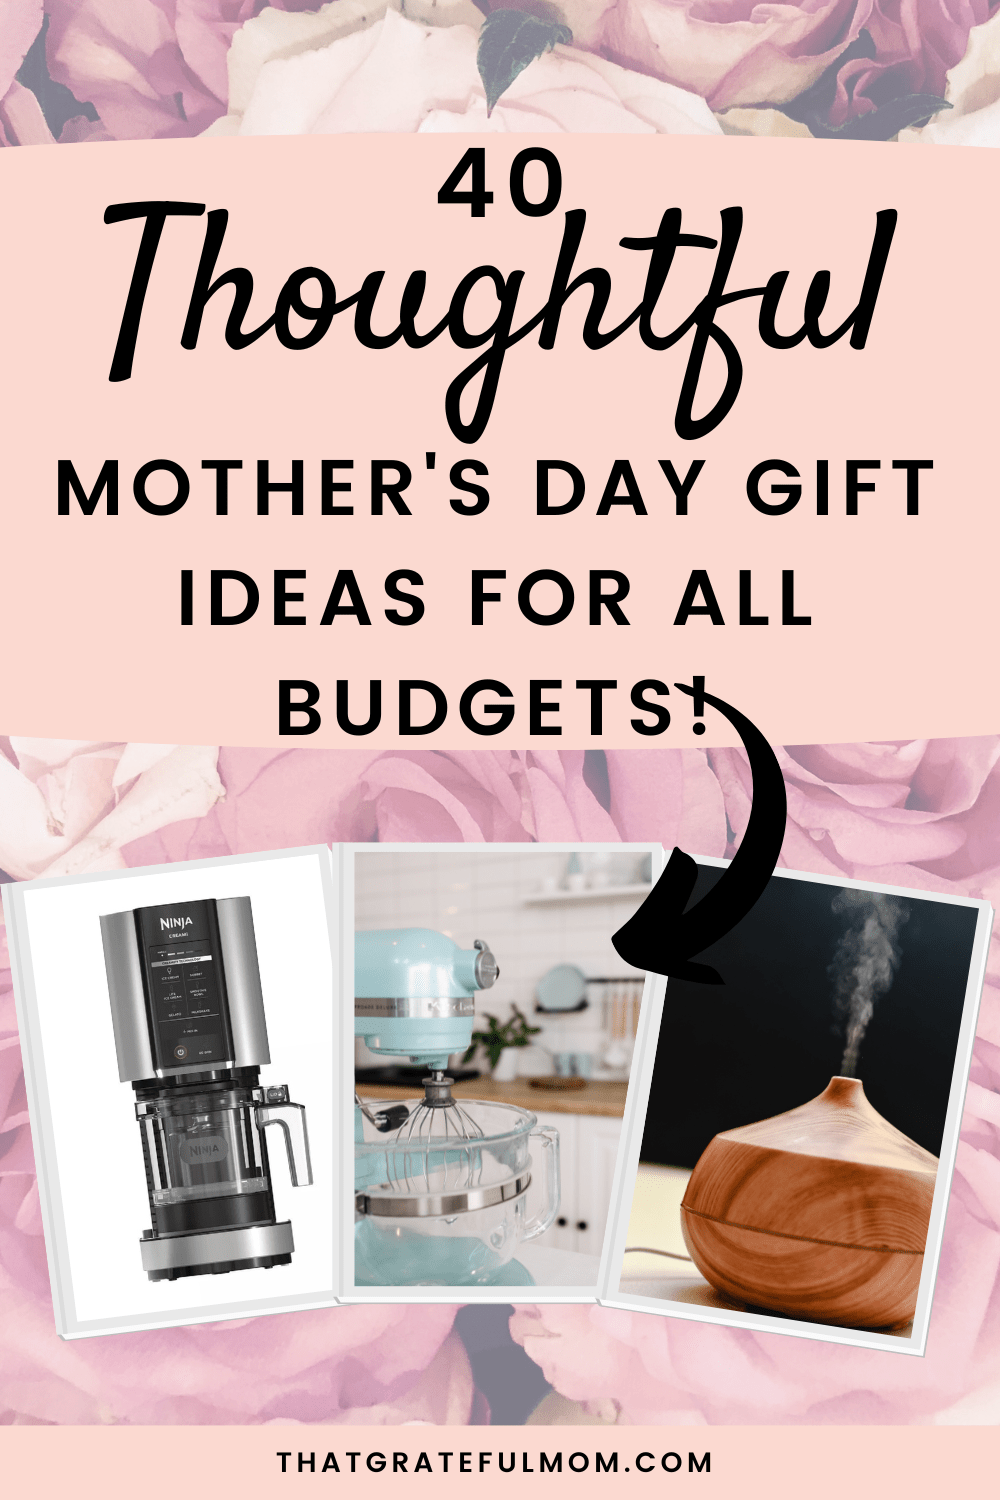 40 thoughtful mother's day gifts for all budgets!